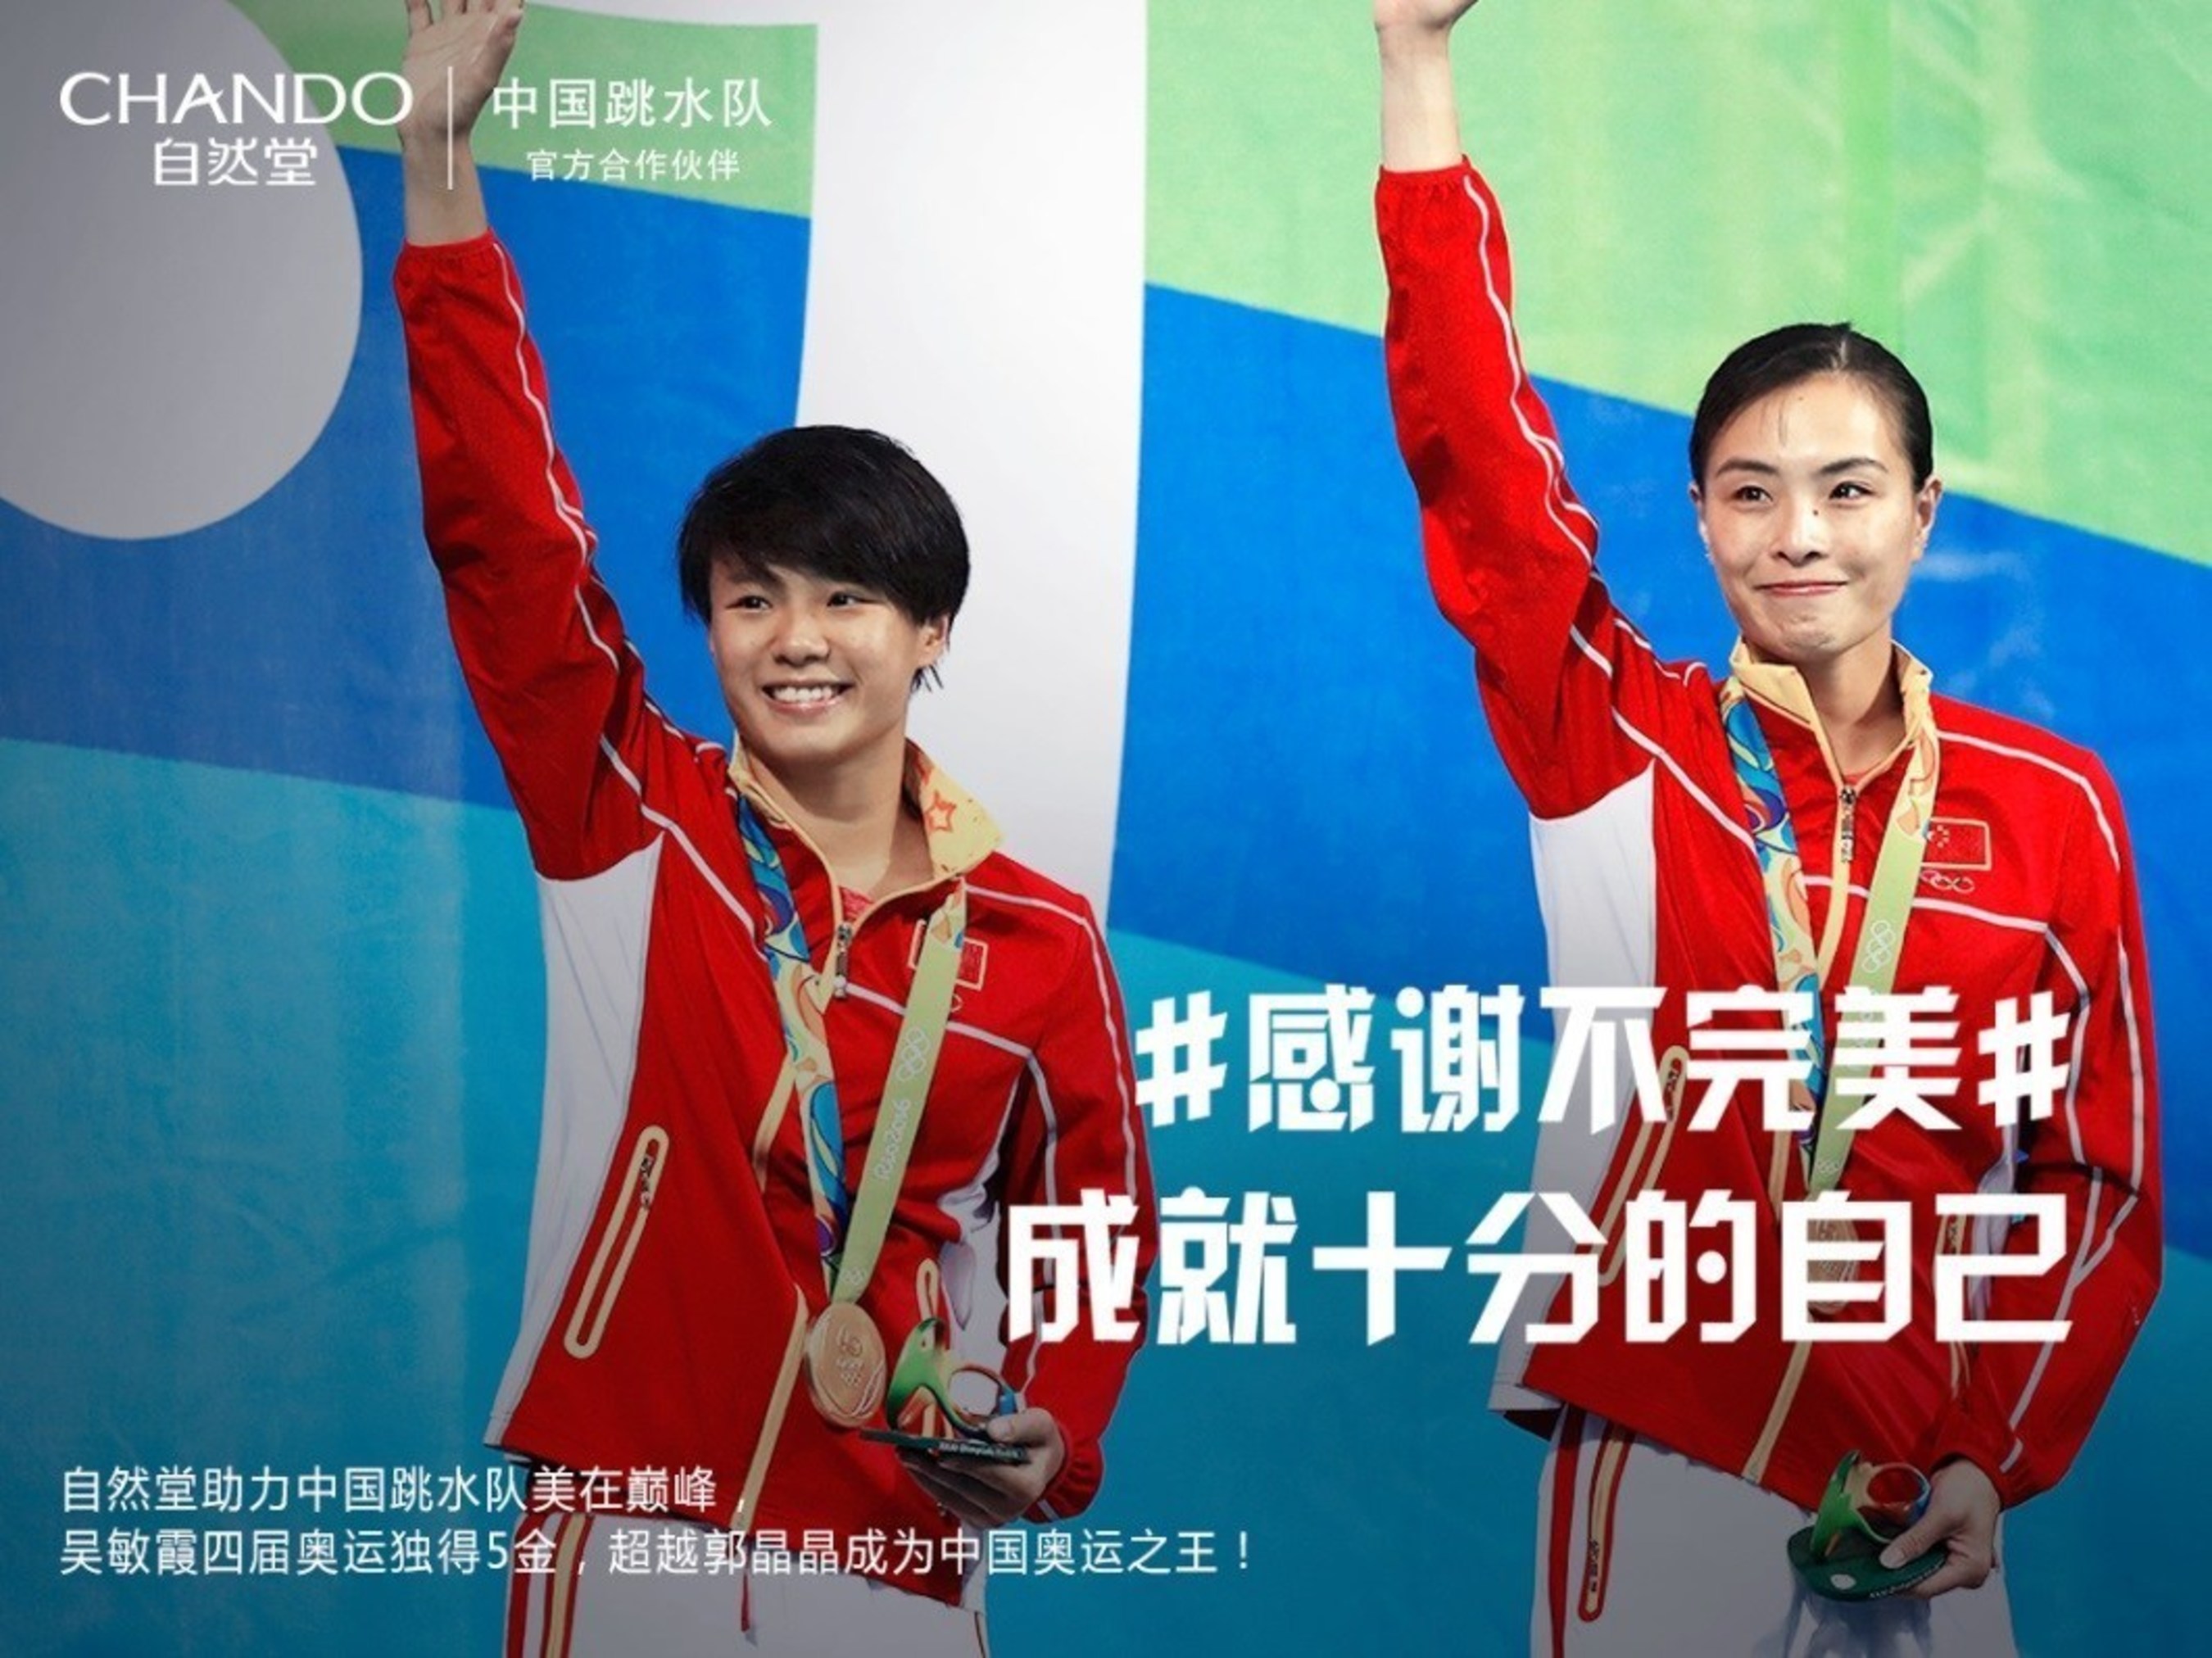 Wu Minxia (right) and Shi Tingmao (left) win the first diving gold medal of the Rio 2016 games